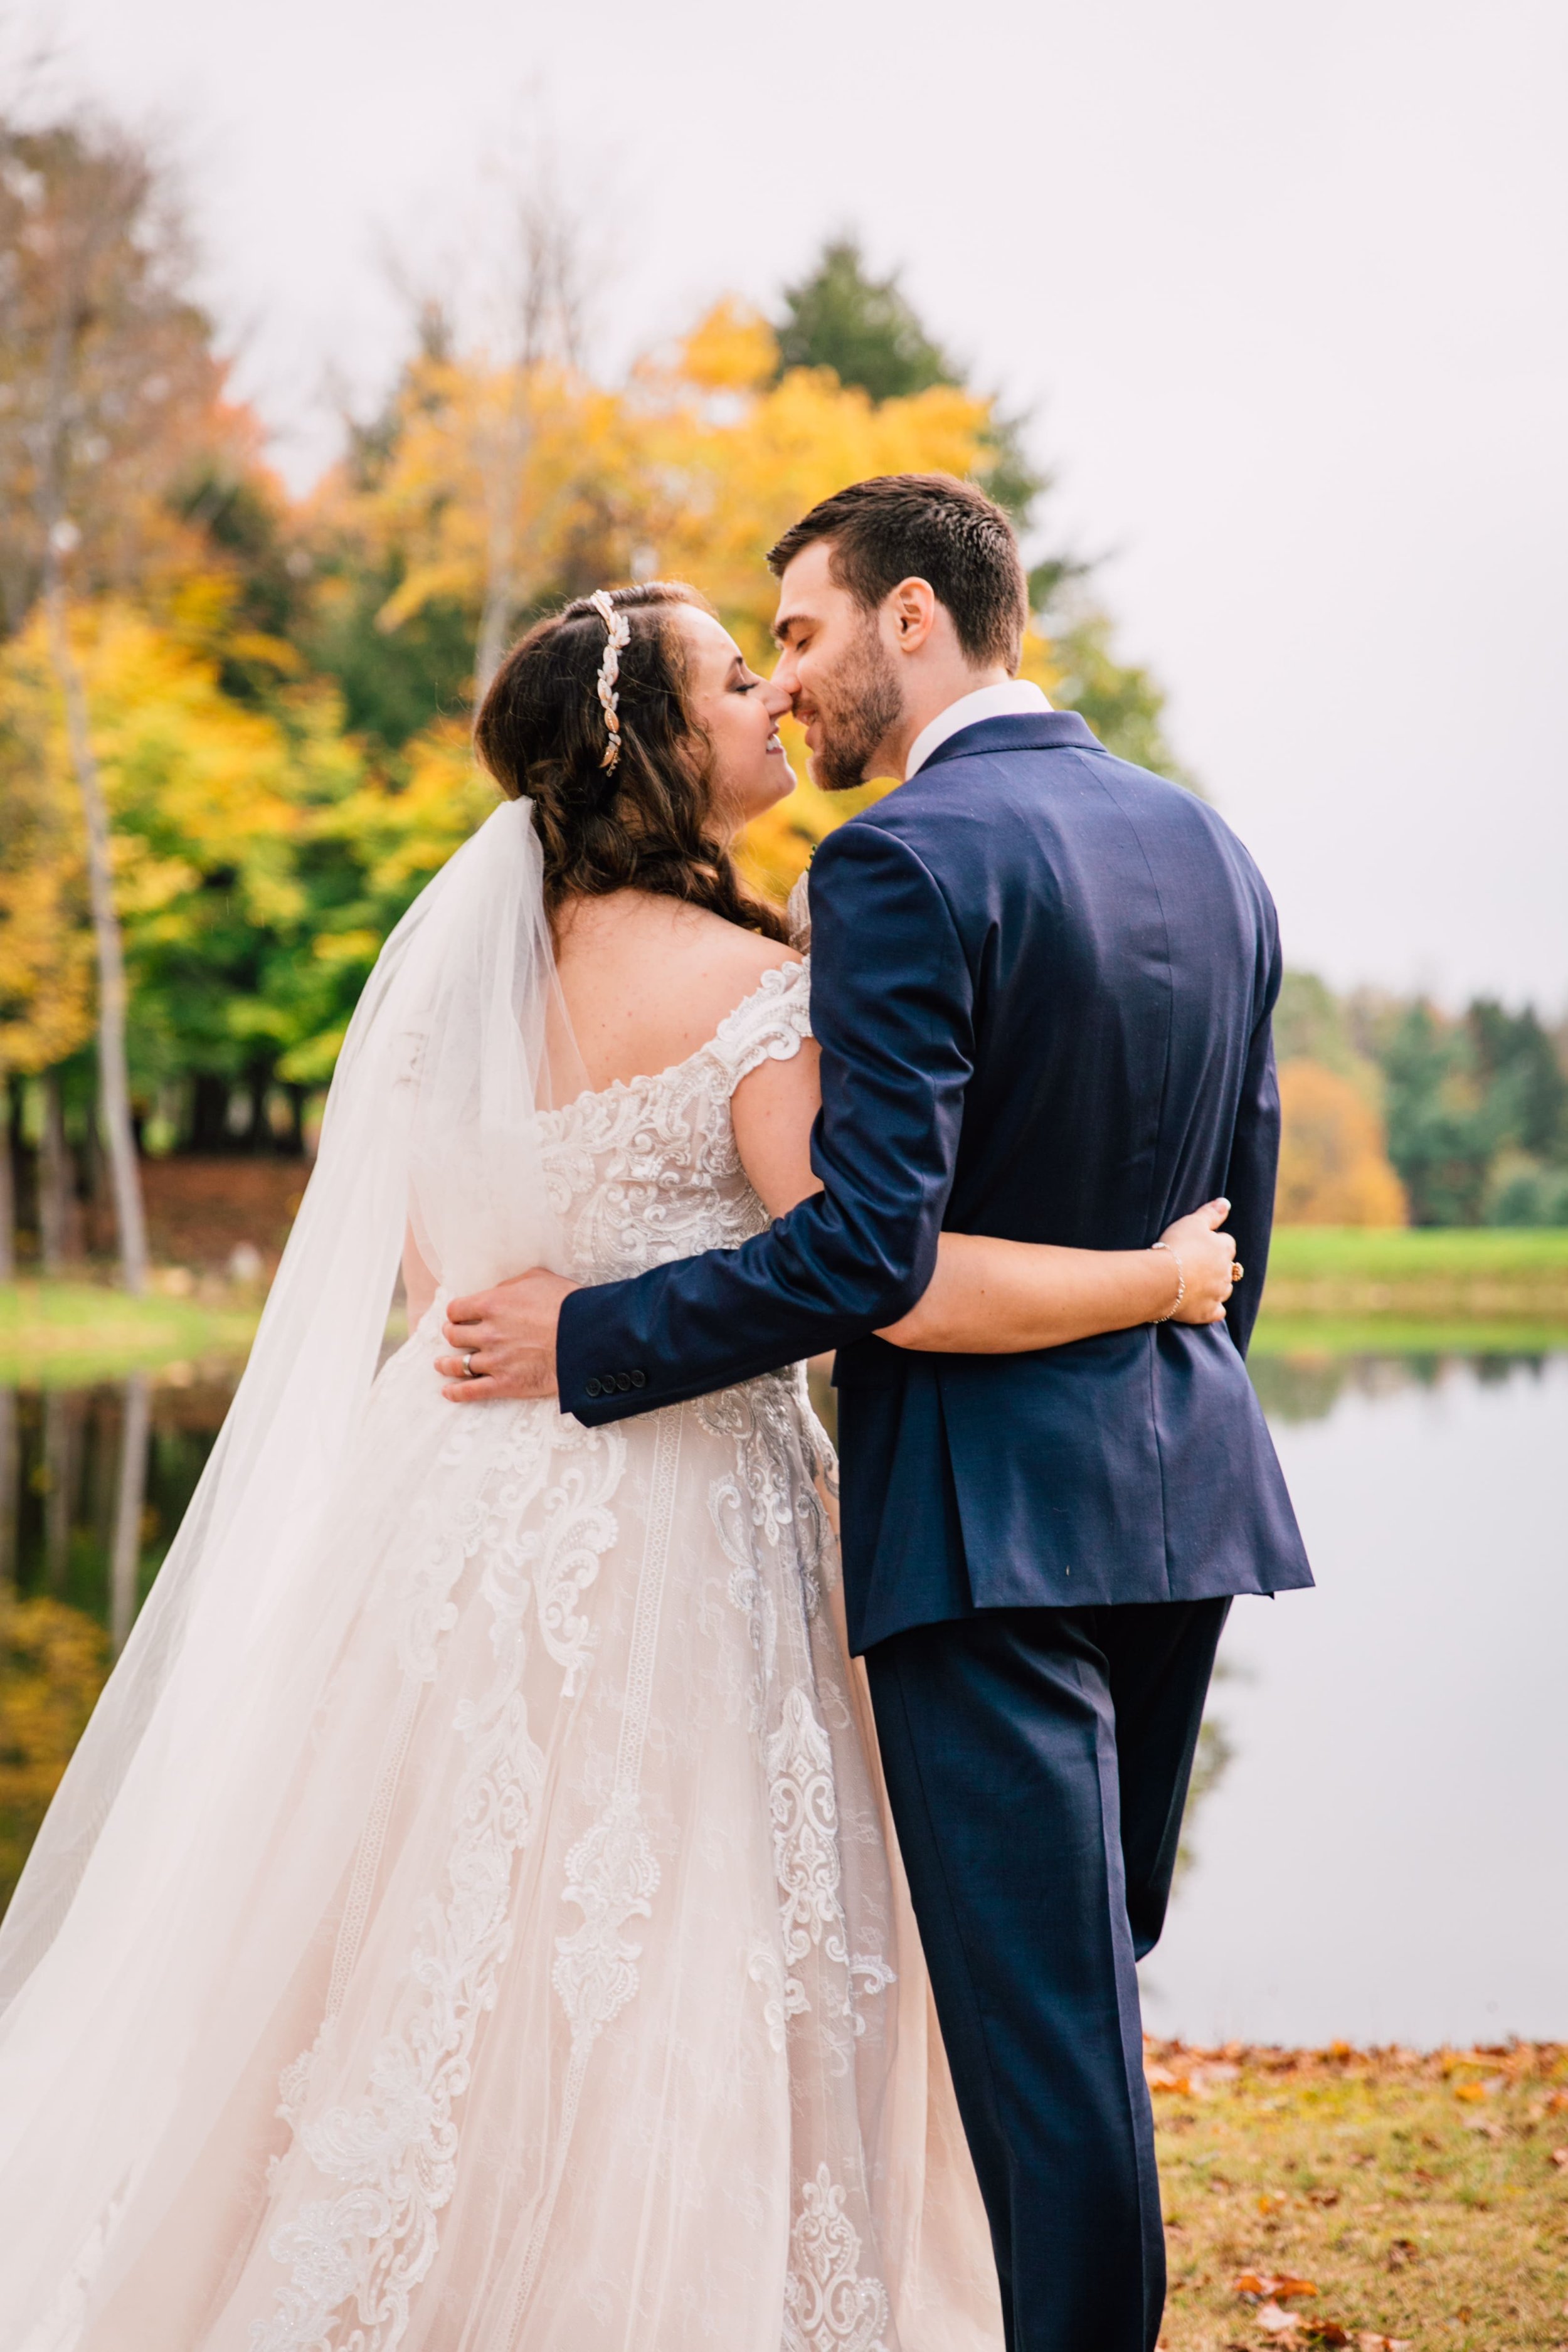  the bride and groom lean in for a kiss with their arms wrapped around each others backs while taking fall wedding photos 